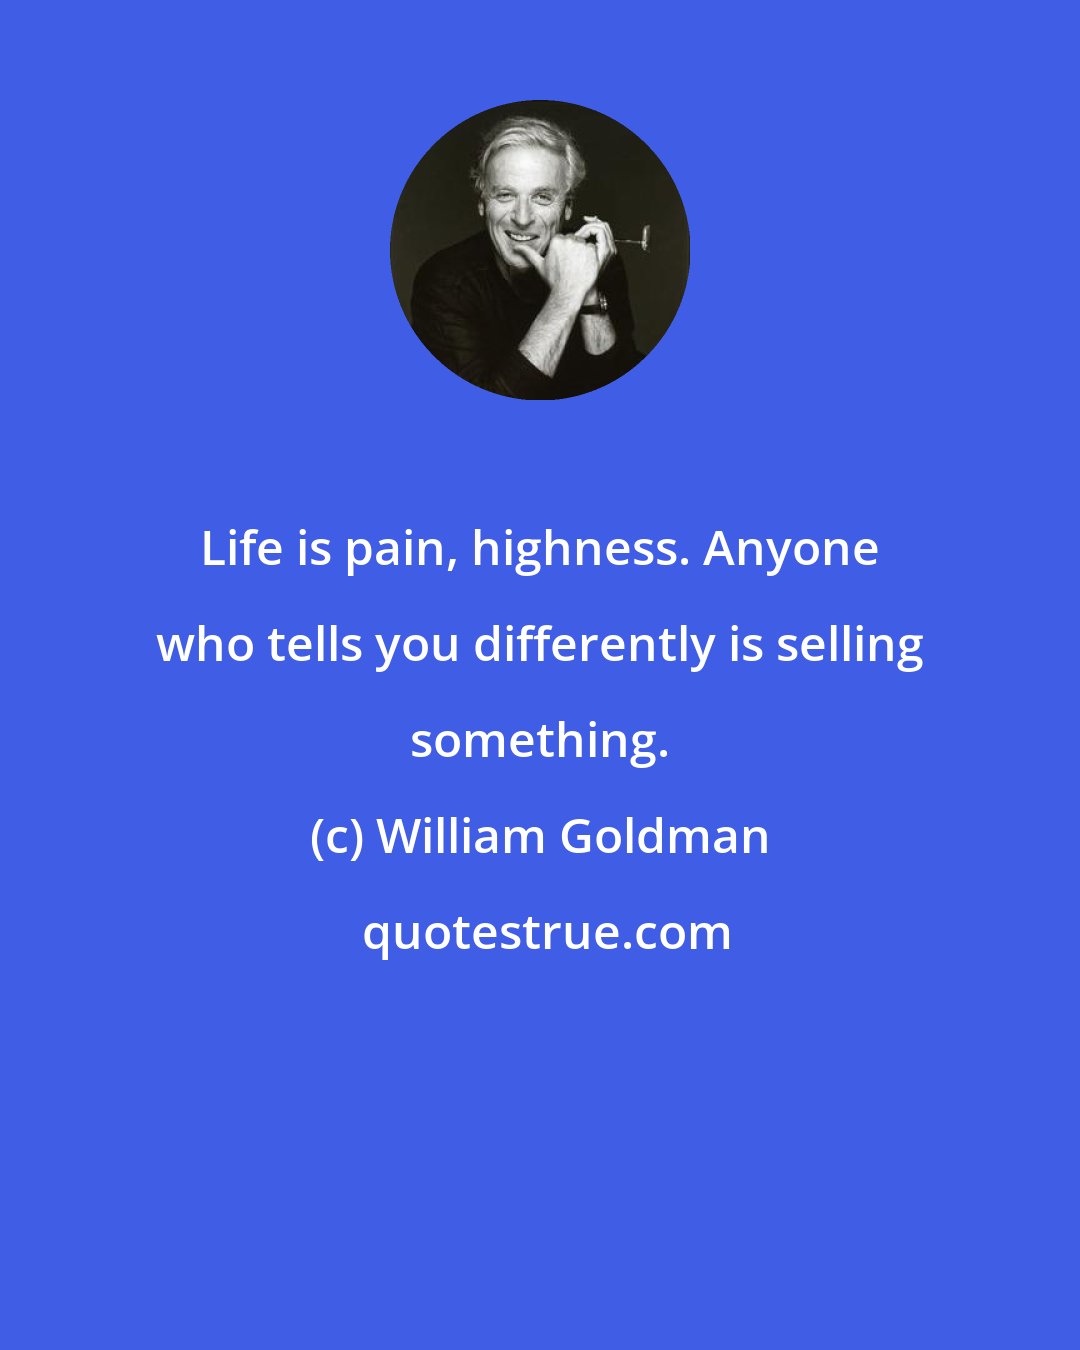 William Goldman: Life is pain, highness. Anyone who tells you differently is selling something.